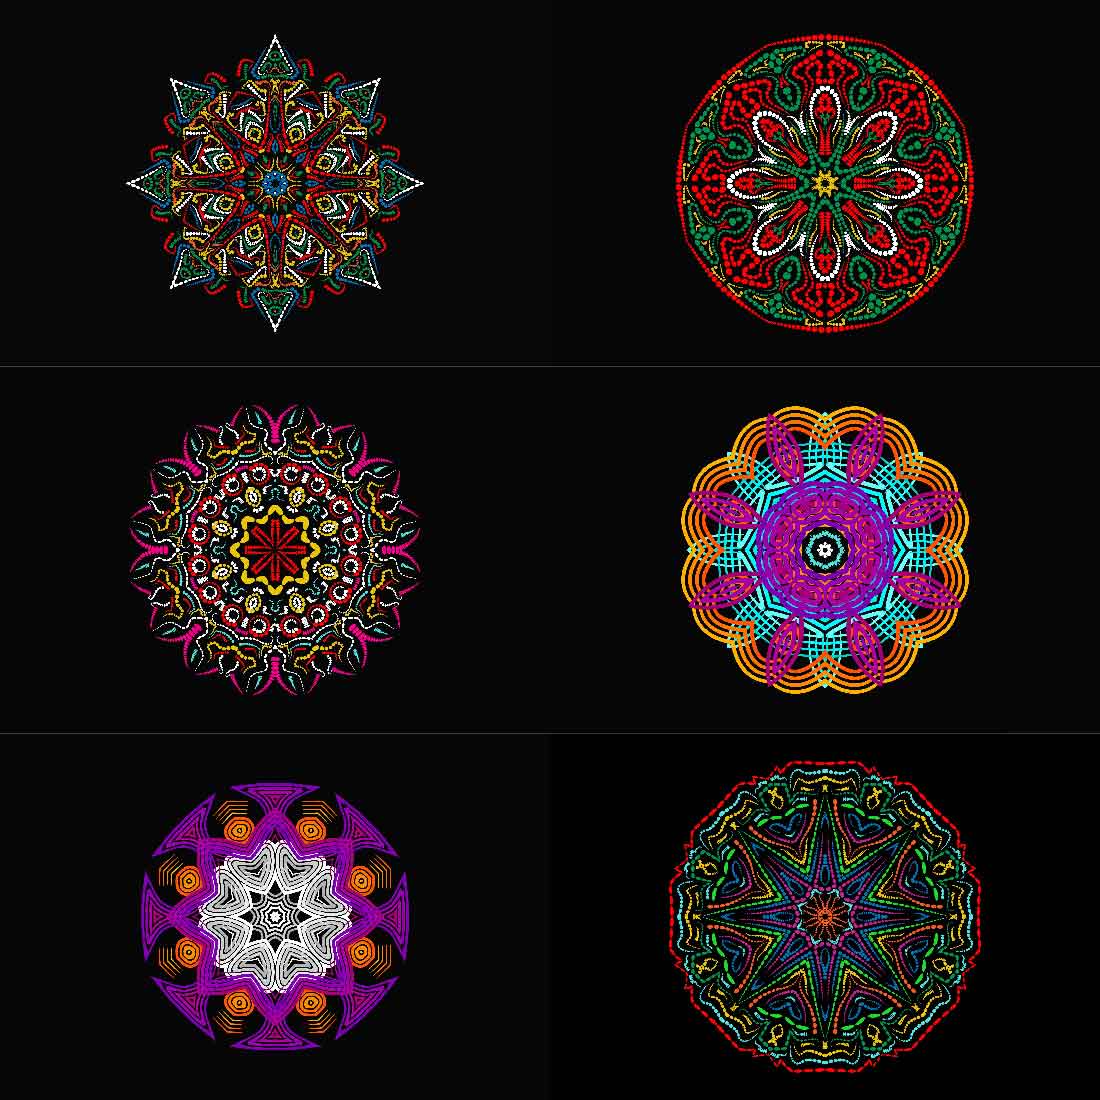 Collection of charming images of geometric mandalas